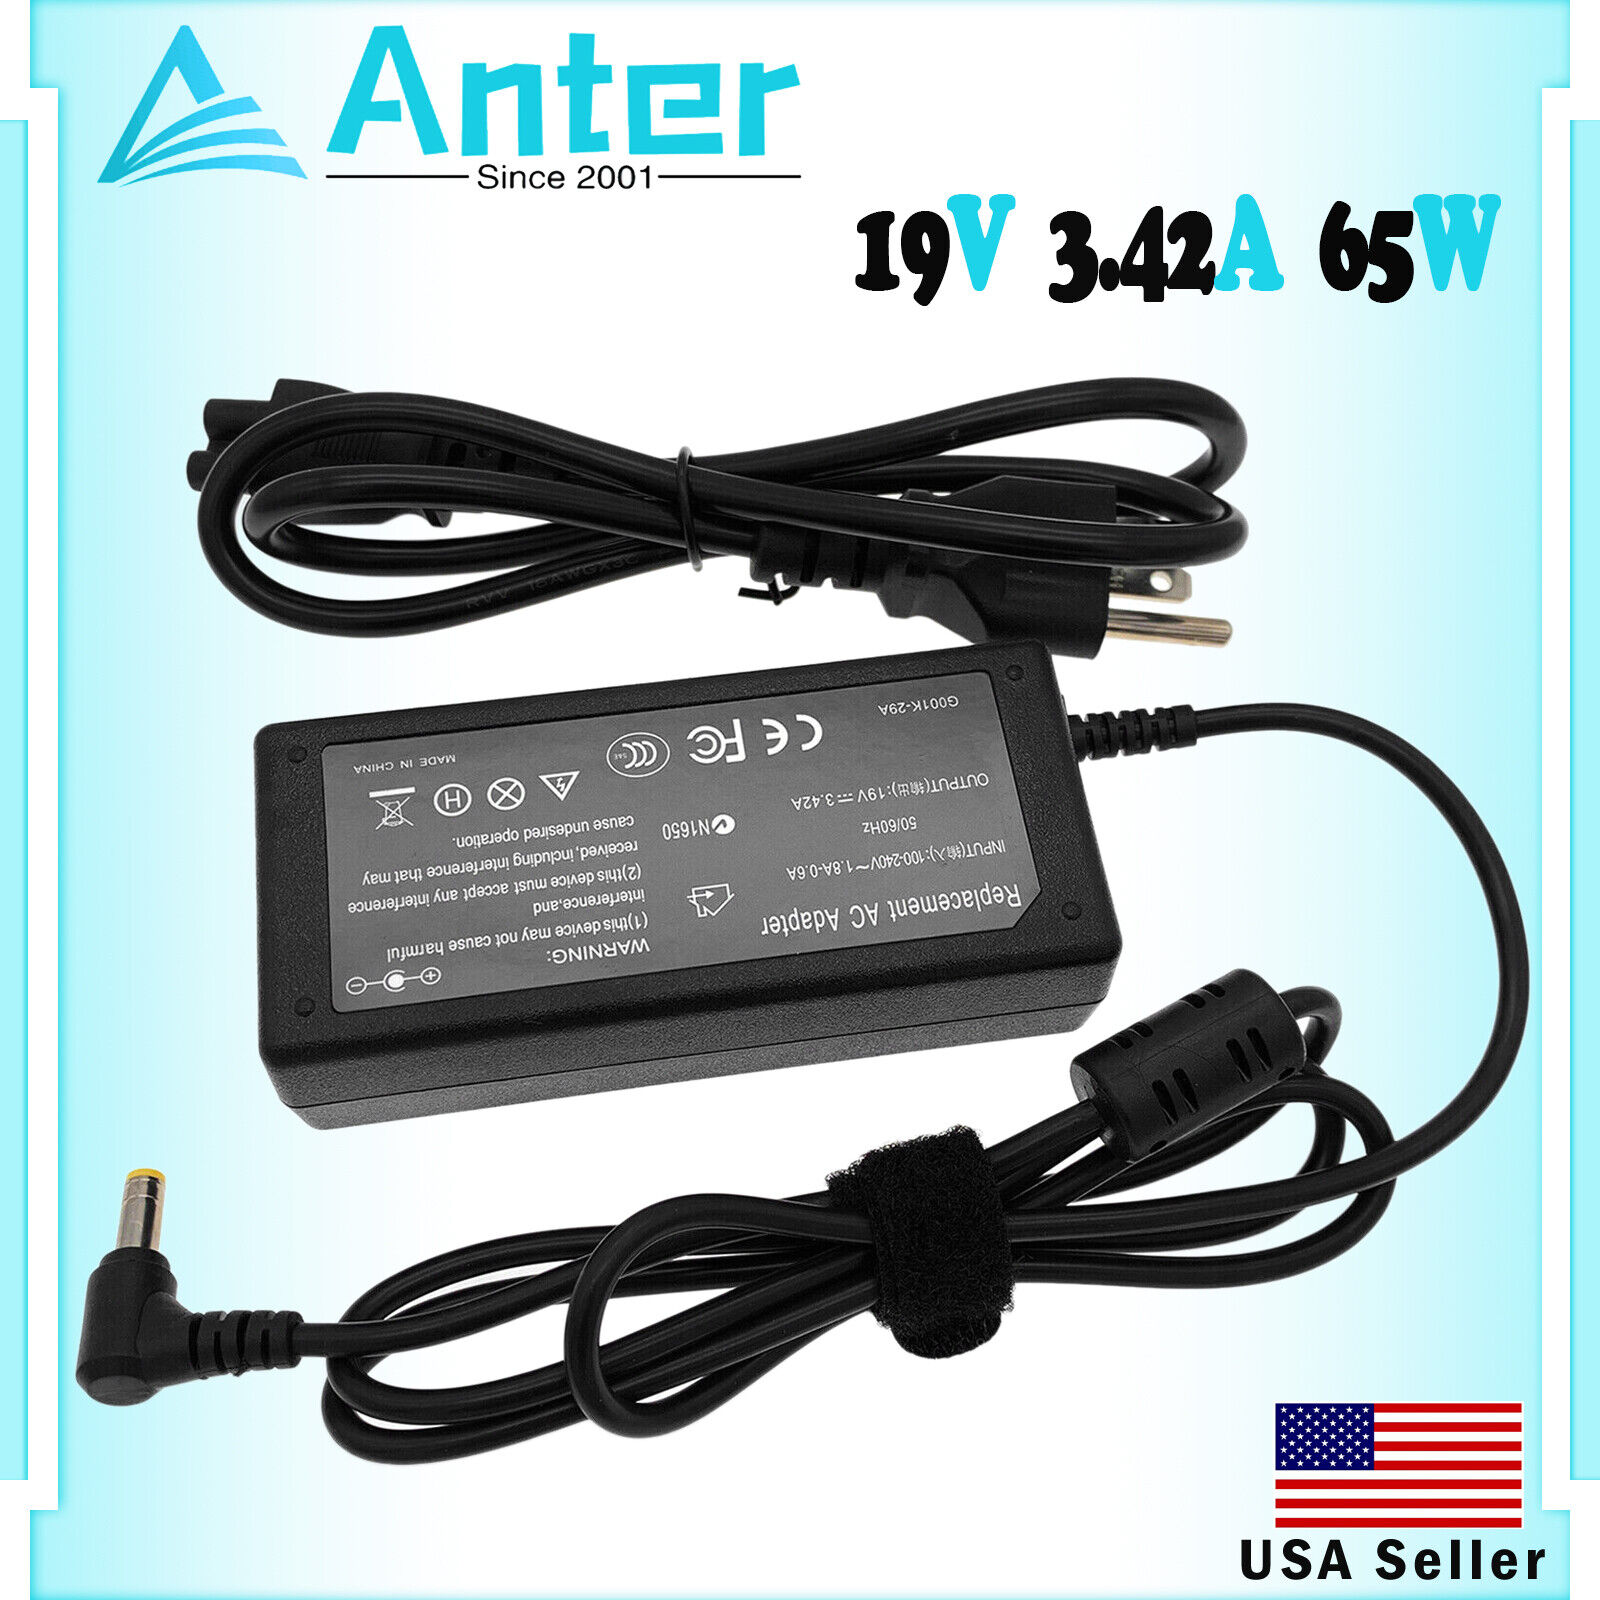 NEW AC ADAPTER BATTERY CHARGER POWER CORD SUPPLY FOR Gateway Solo 2300 2550 5150